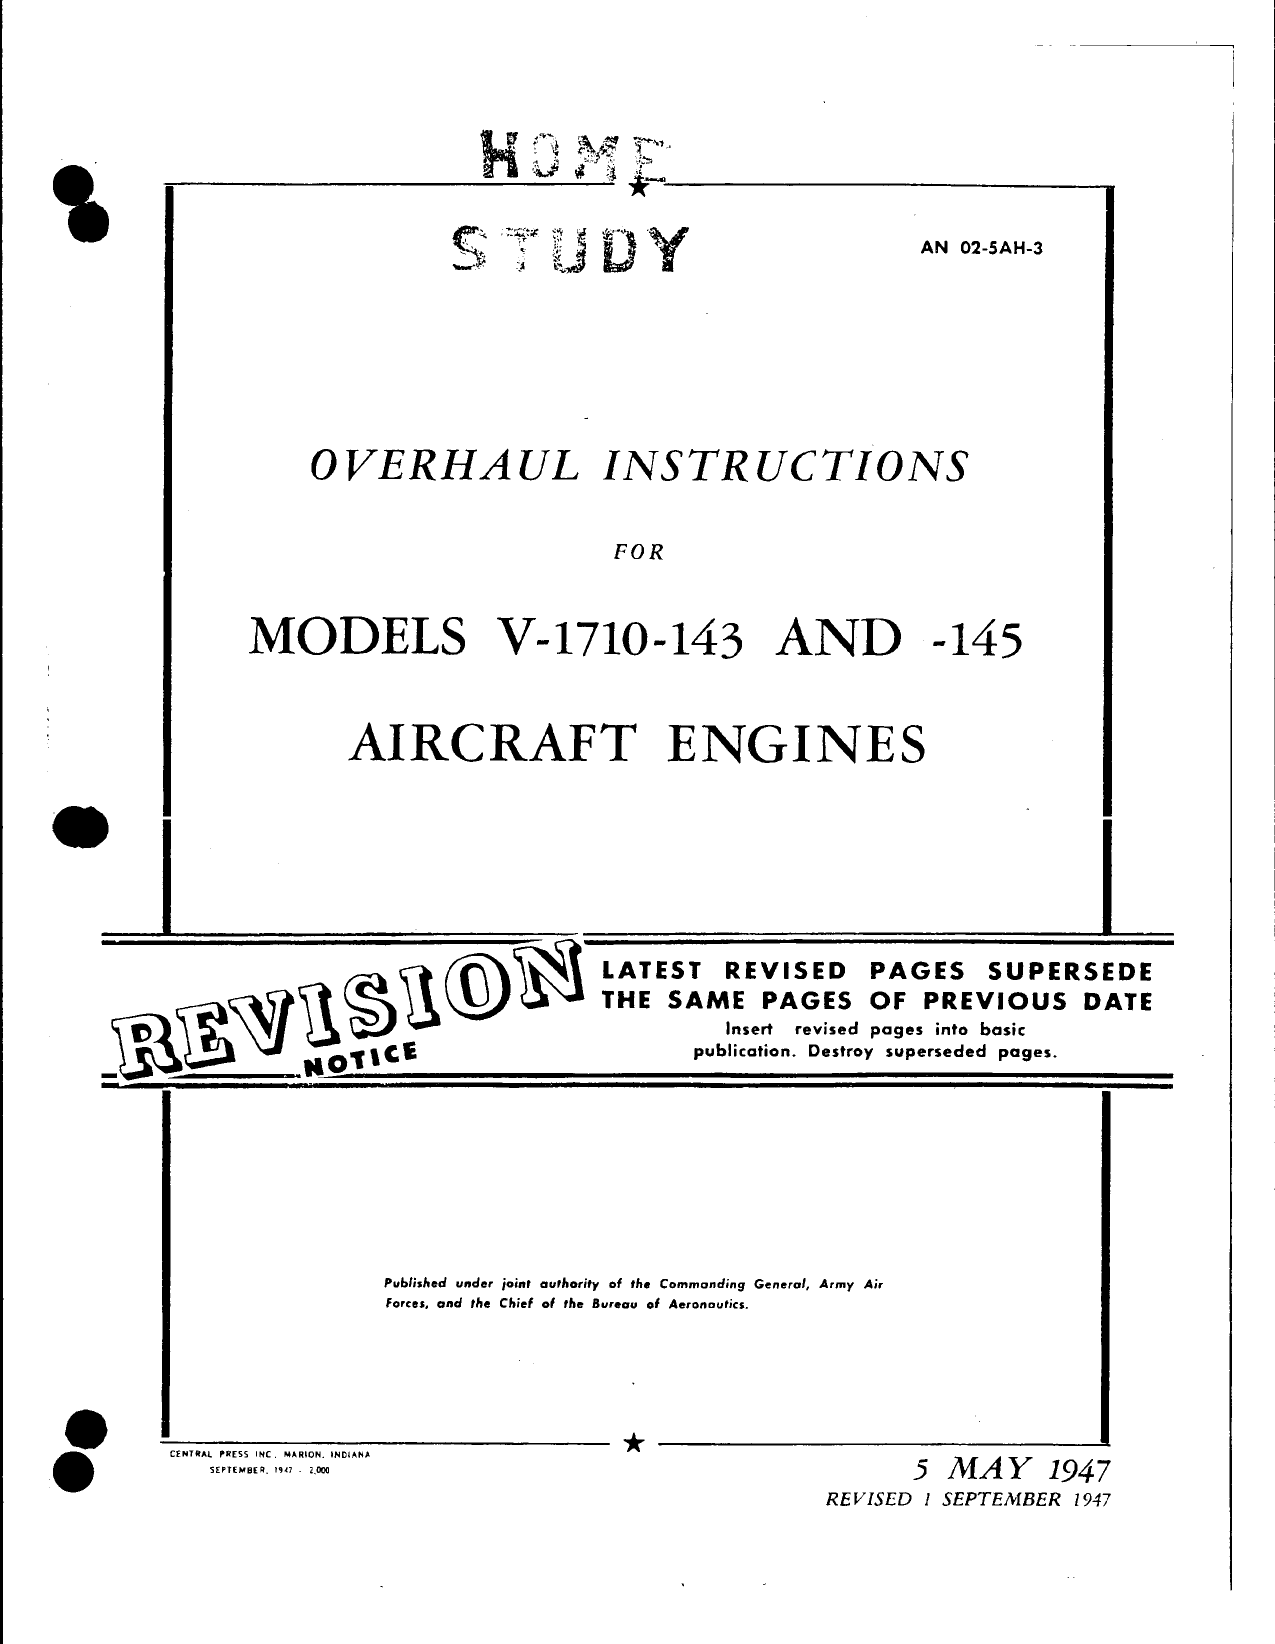 Sample page 1 from AirCorps Library document: Overhaul Instructions for Models V-1710-143 and -145 Aircraft Engines